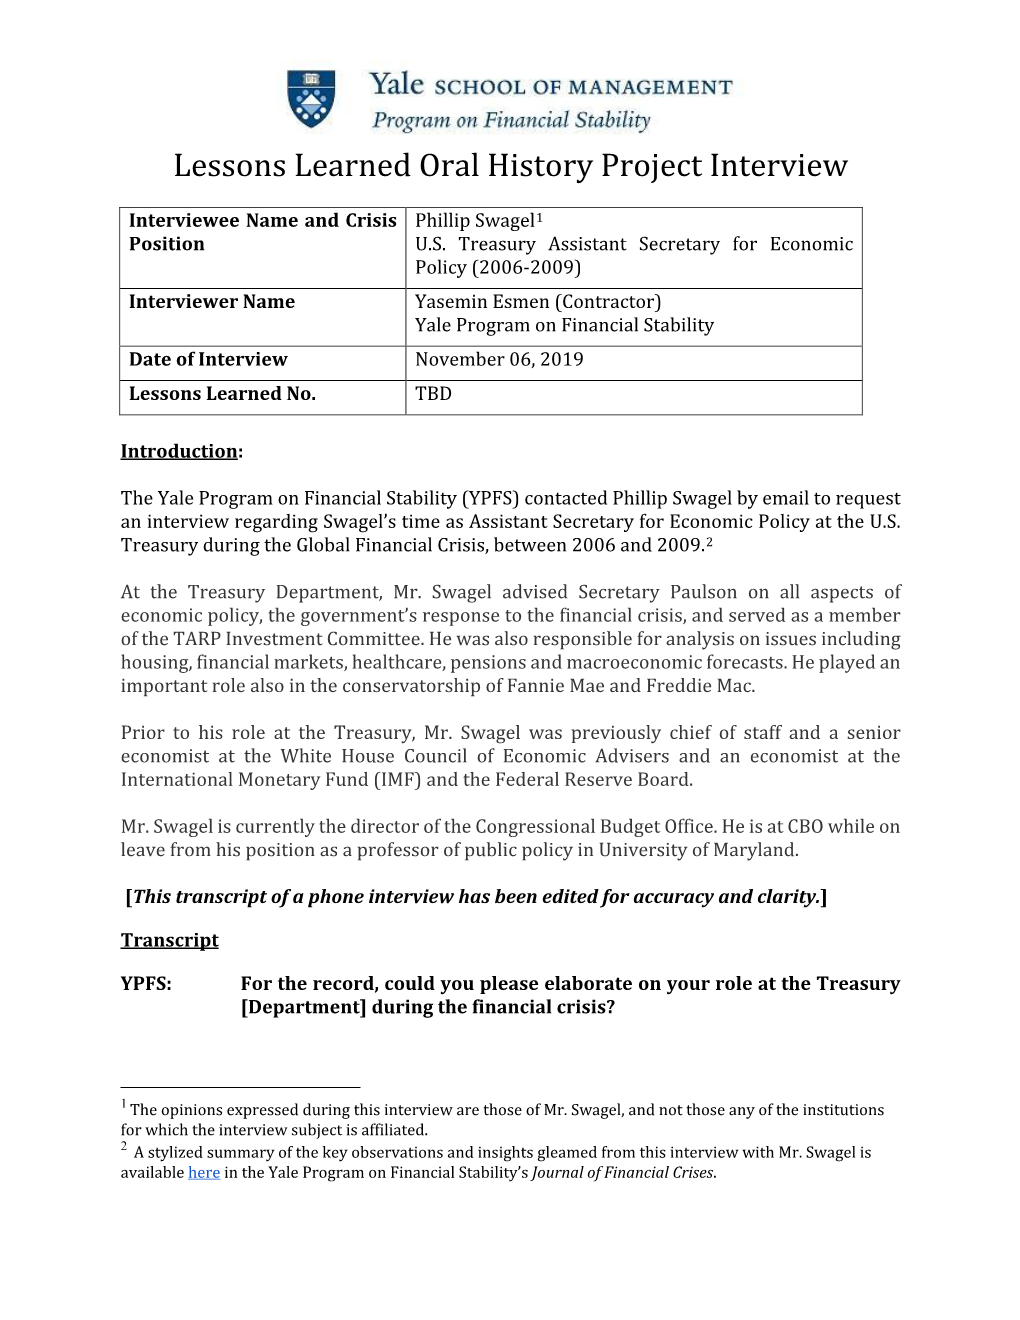 YPFS Lessons Learned Oral History Project: an Interview with Phillip